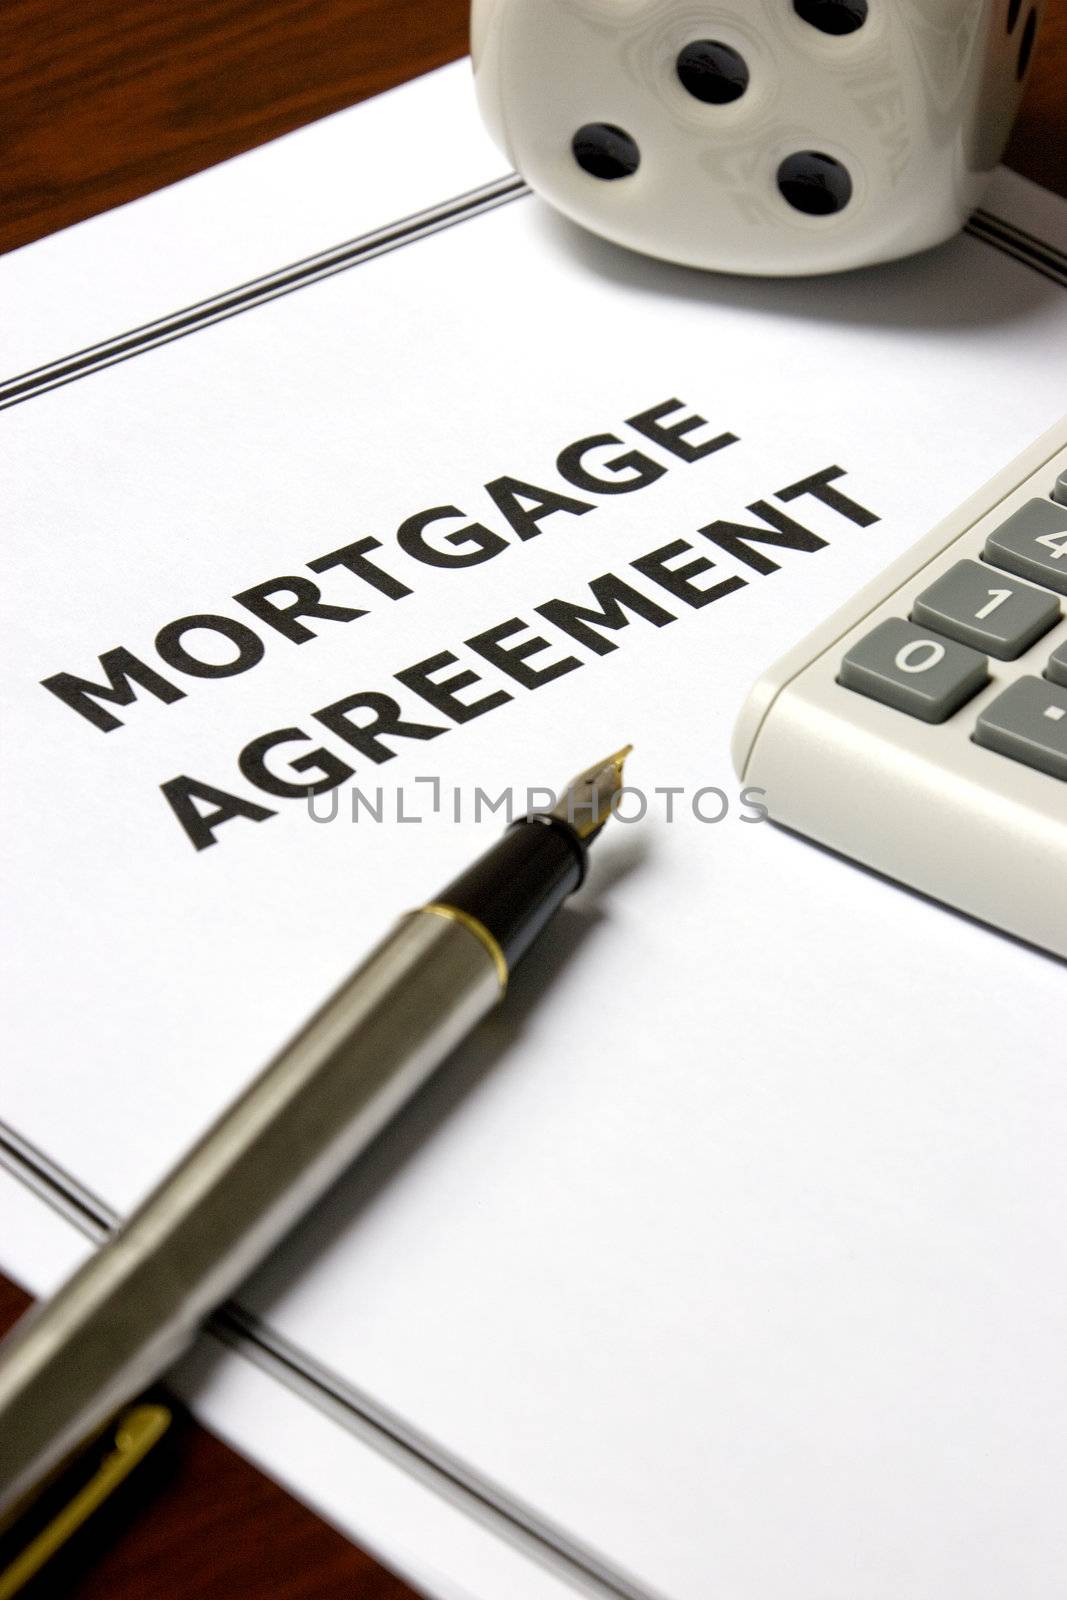 Image of a mortgage agreement on an office table.